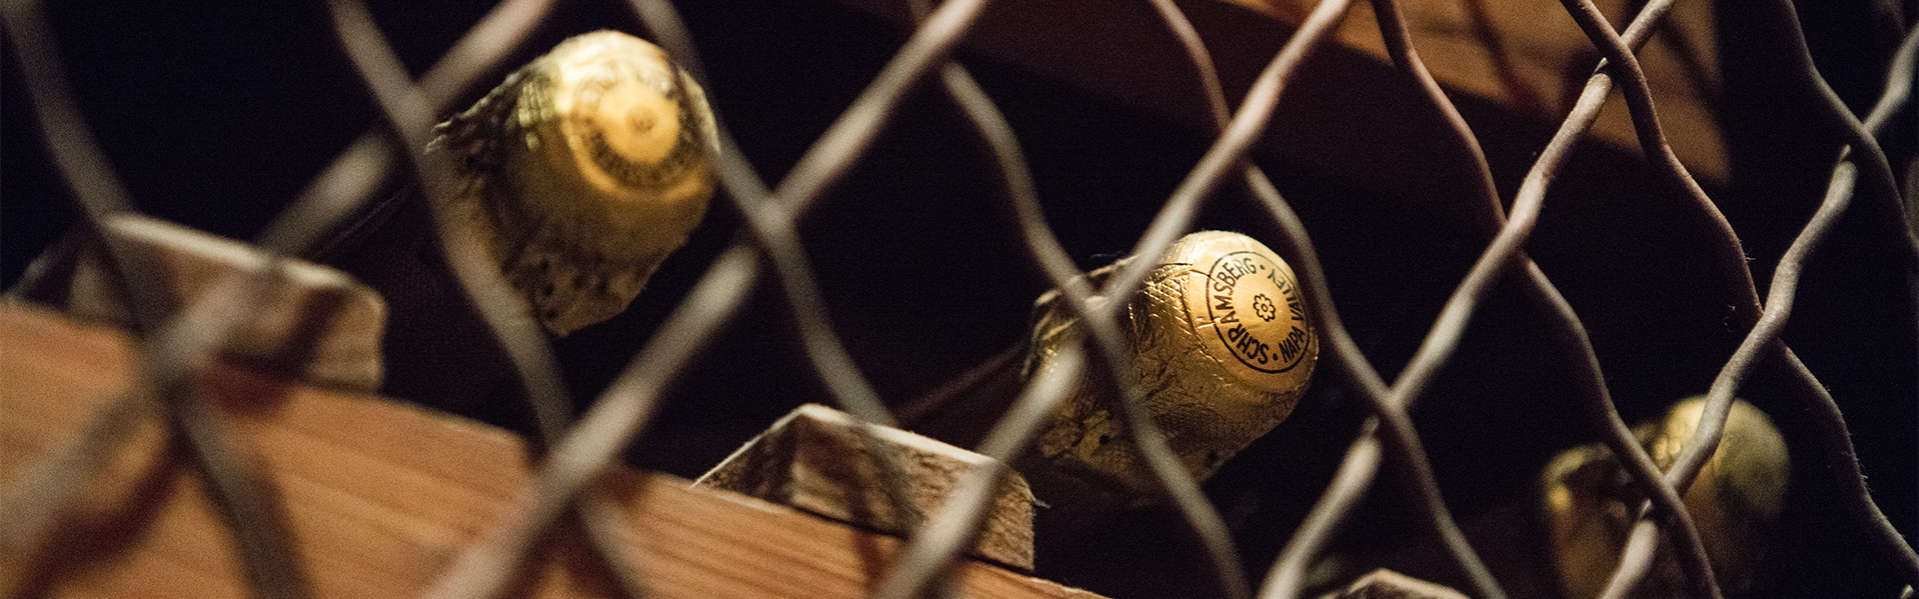 Schramsberg sparkling wine stored on wine racks in the Davies room at visitors center